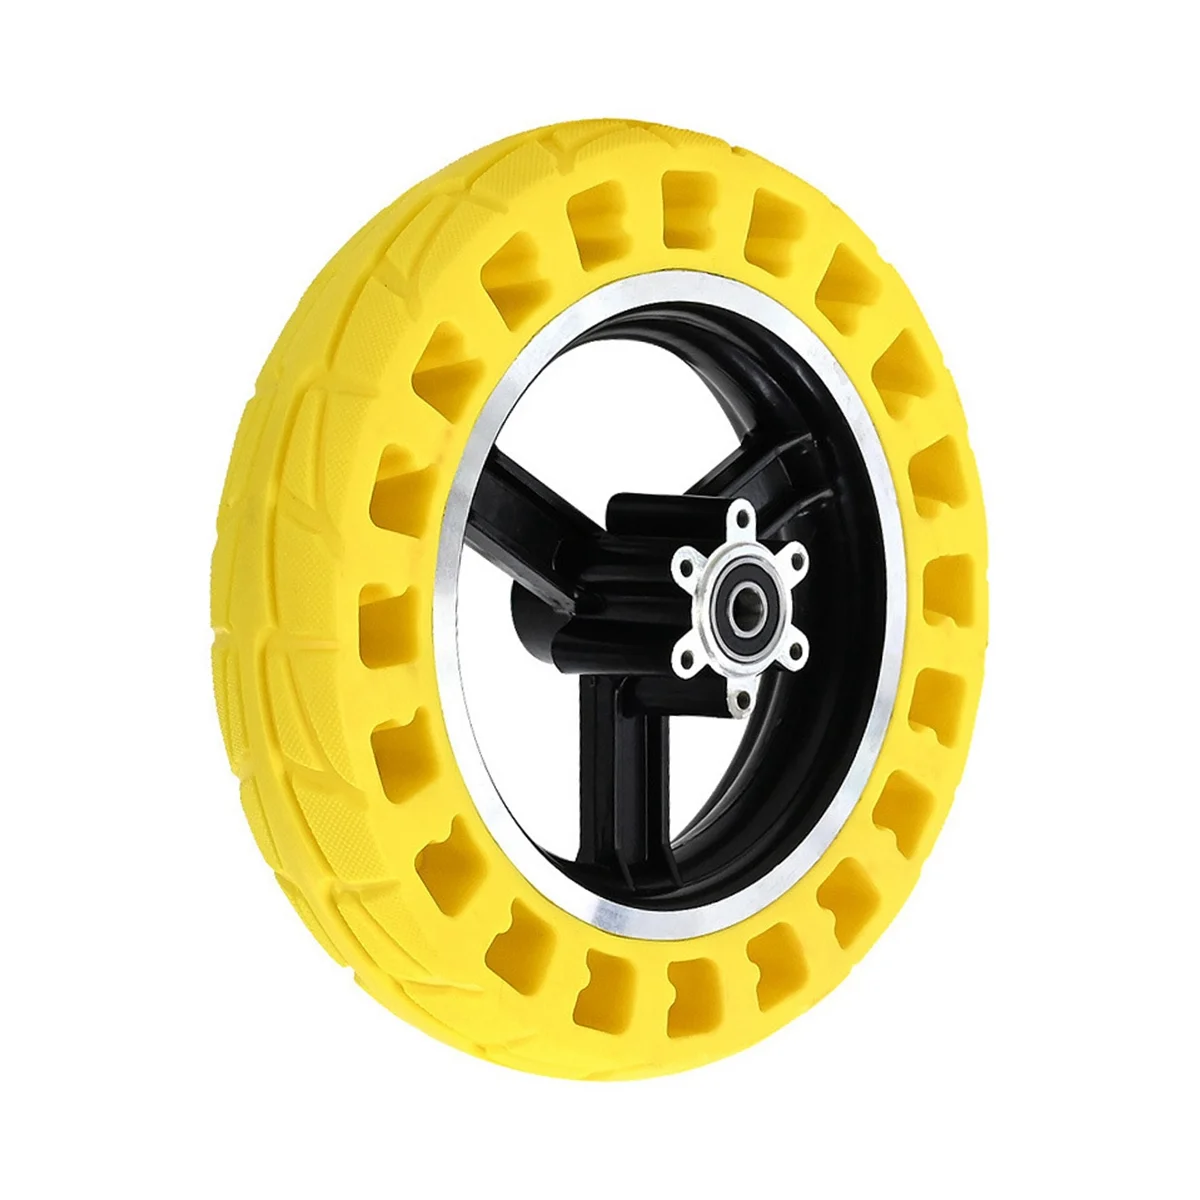 

10 x 2.125 Inch Tires M4 Electric Scooter Honeycomb Solid Shock Absorbing Tire Hub for Kugoo